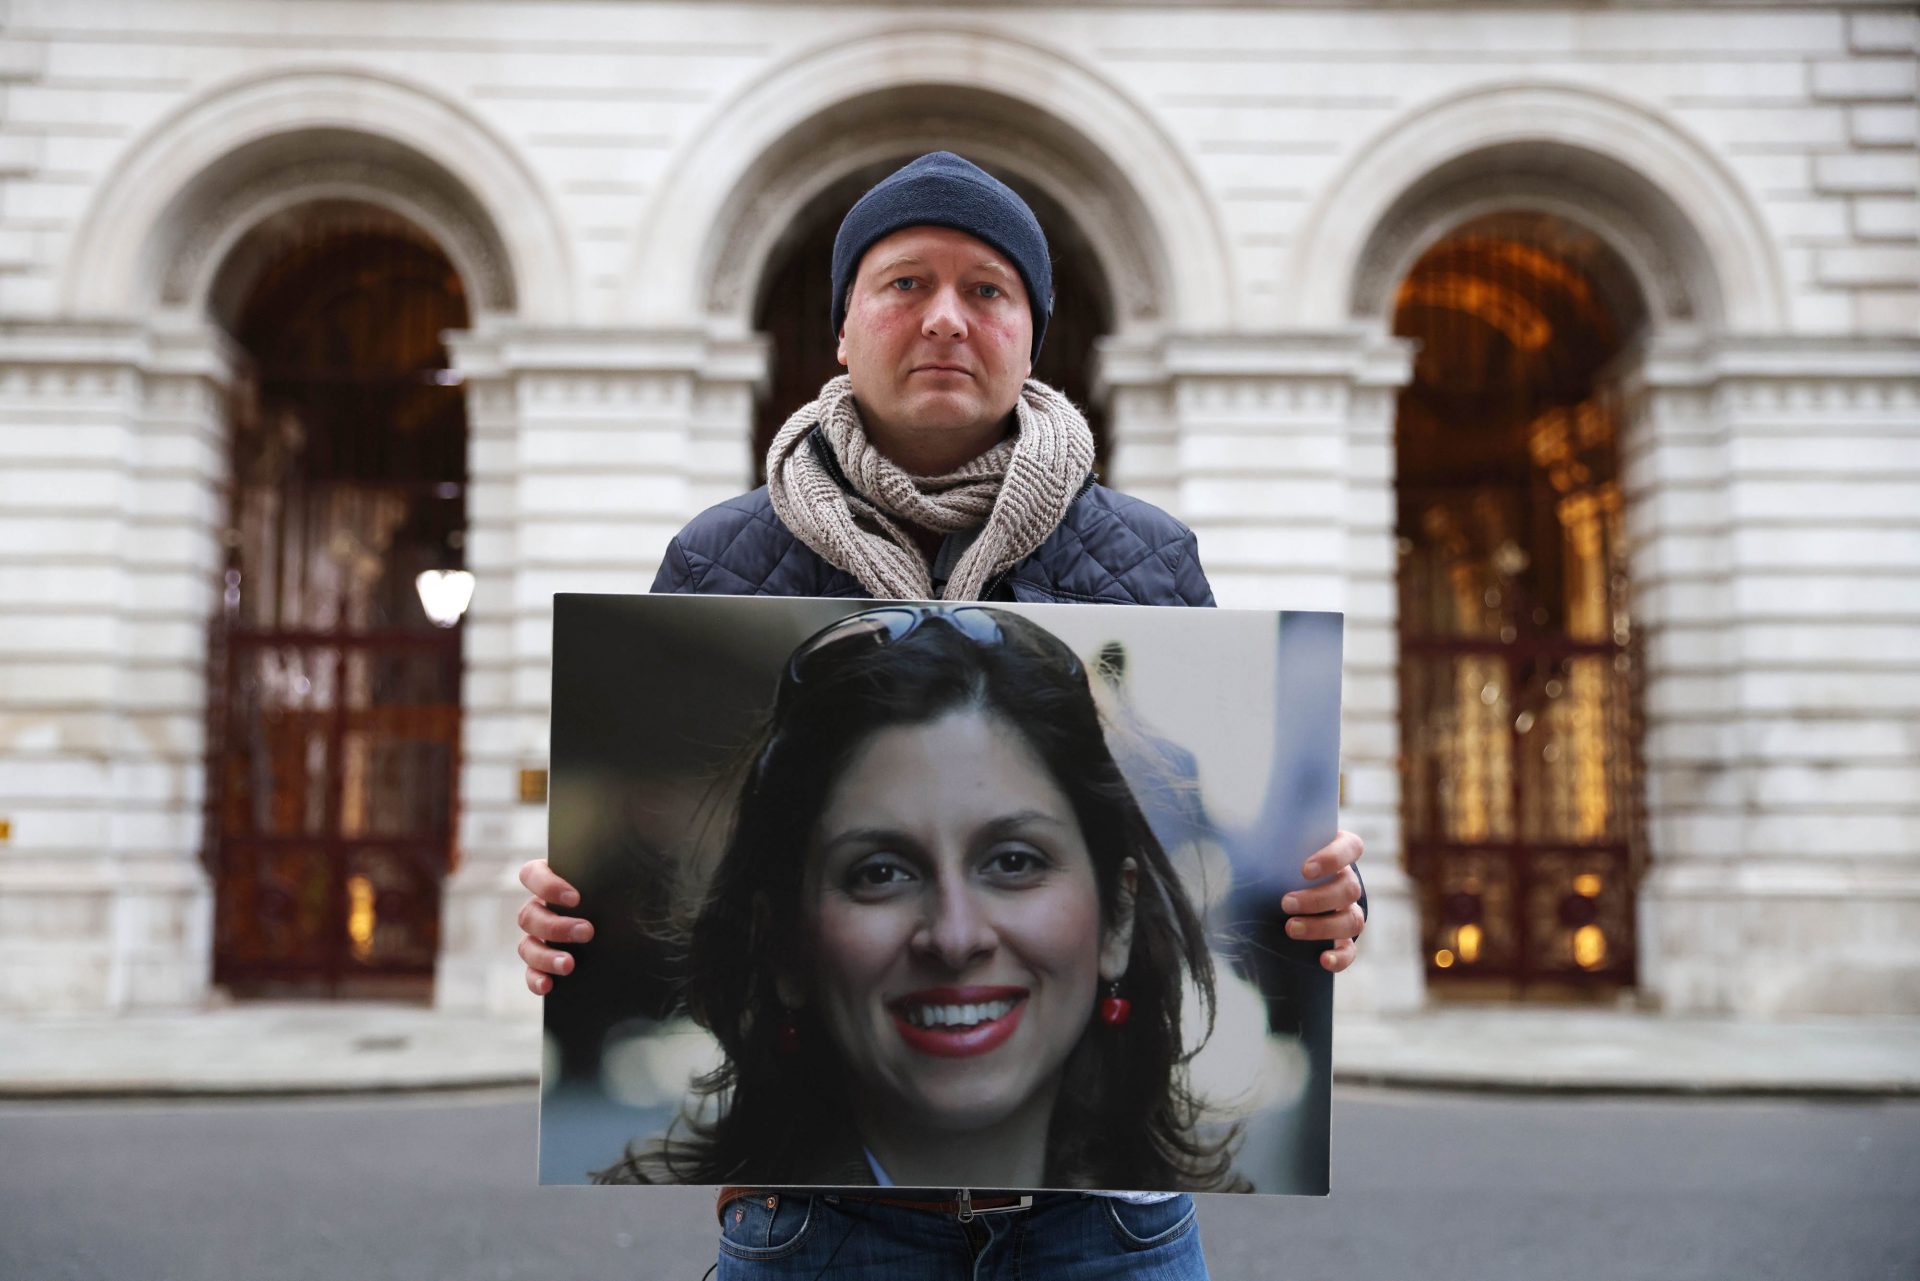 Richard Ratcliffe holds up a photo of his wife as he protests outside the Foreign Office while on hunger strike. Photo: Hollie Adams/Getty Images